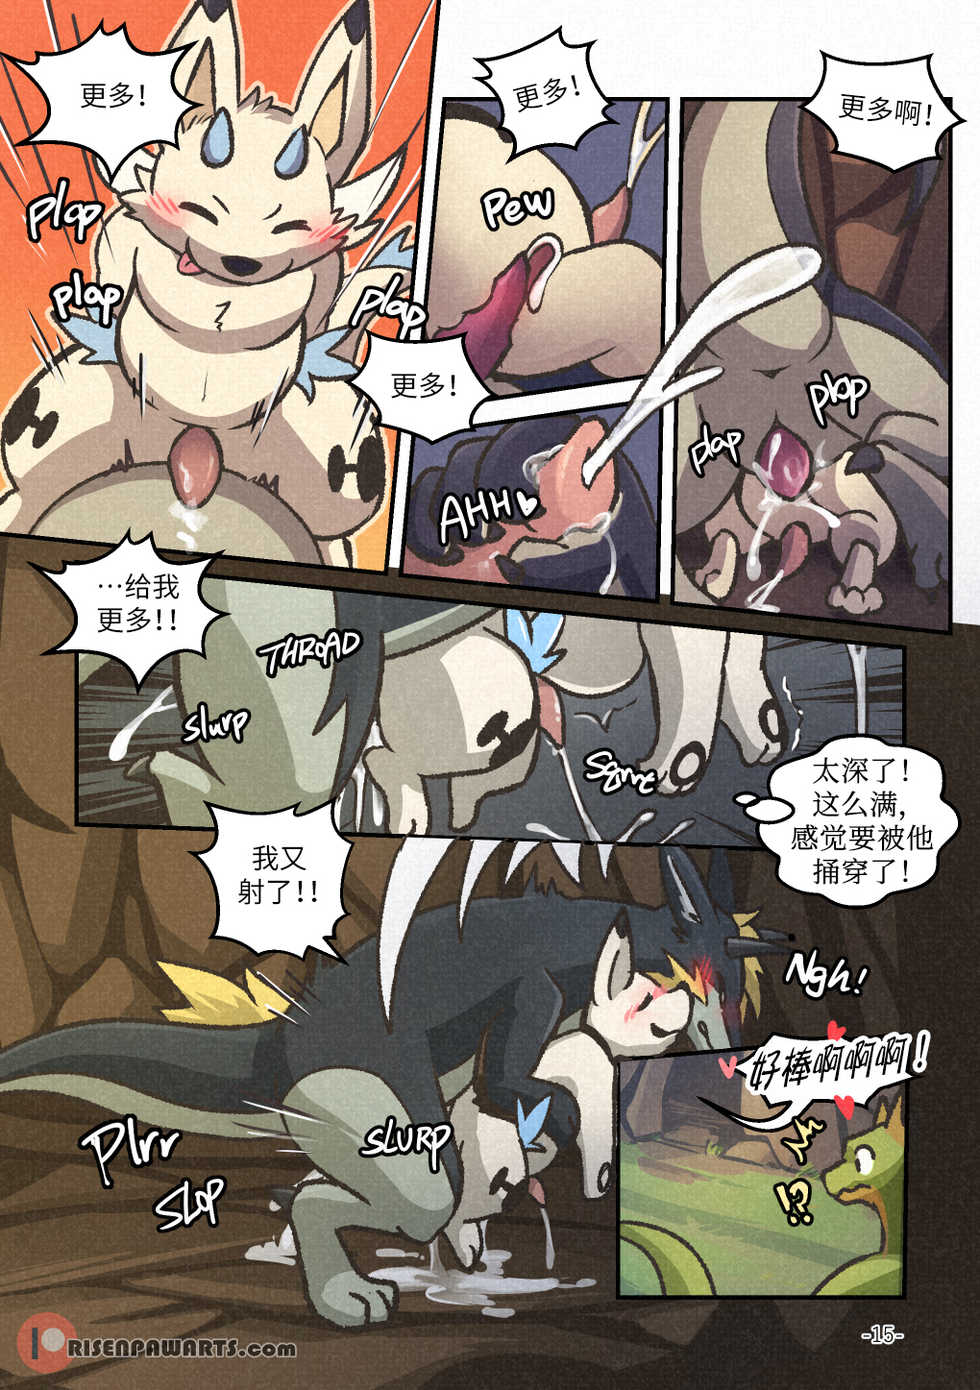 [Risenpaw] Out of Control [Chinese] [悬赏大厅×不可视汉化组] - Page 14